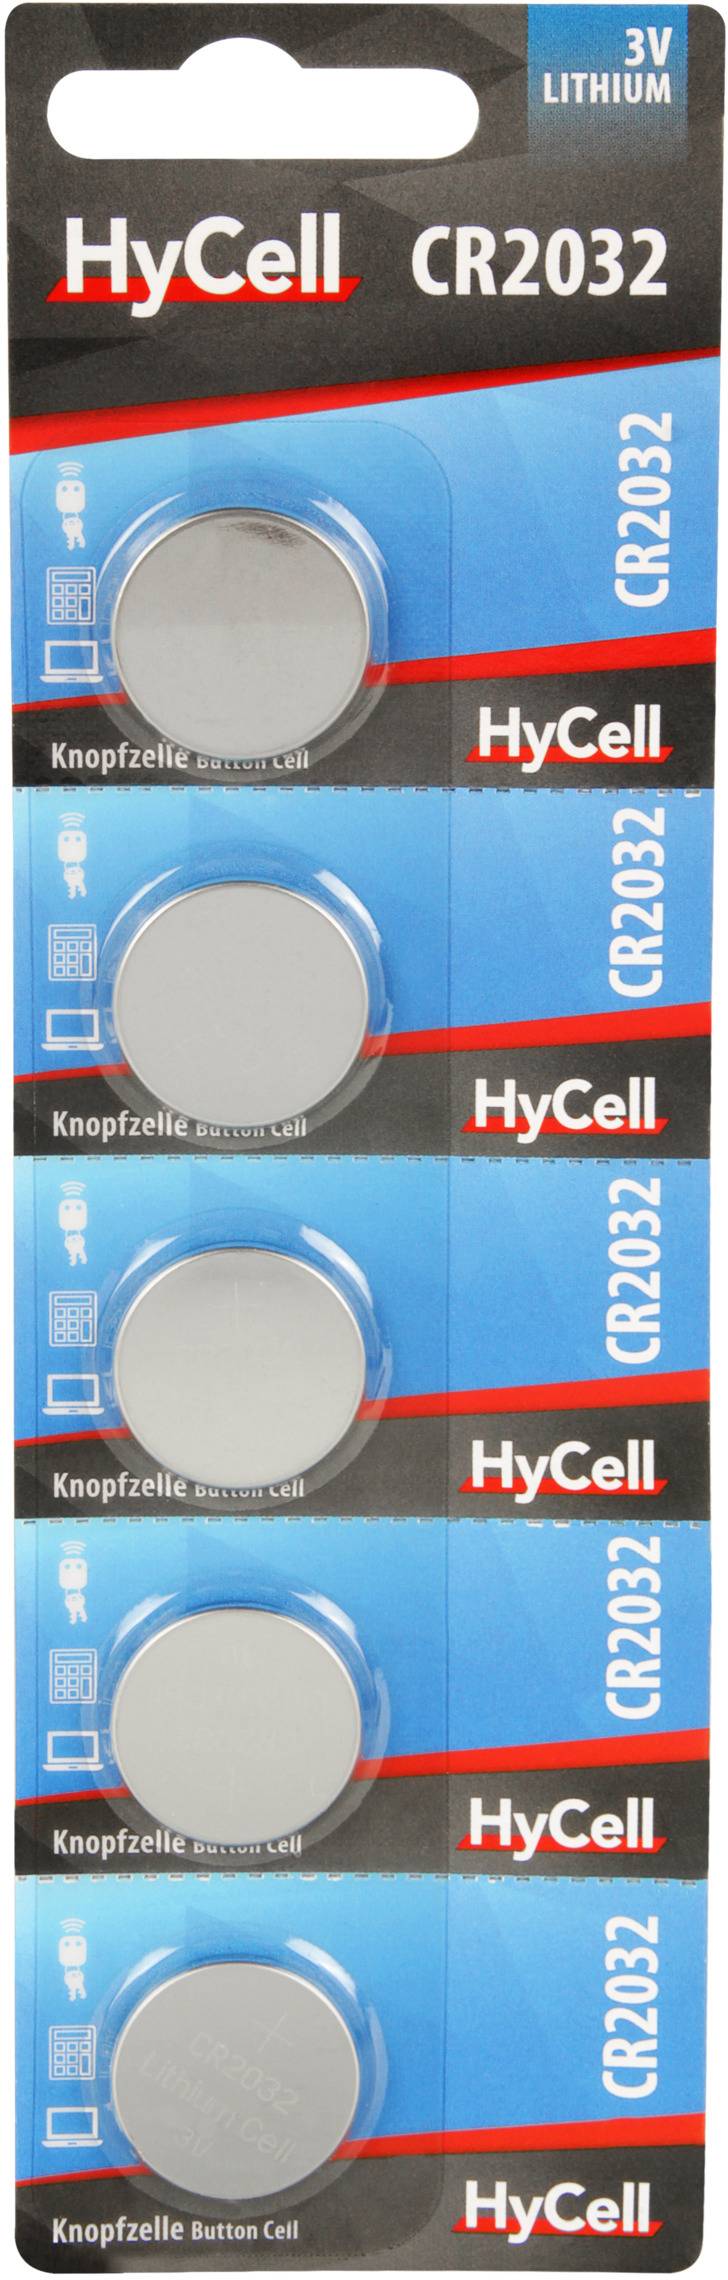 HYCELL CR2032 Knopfzelle CR 2032 Lithium 200 mAh 3 V 5 St.